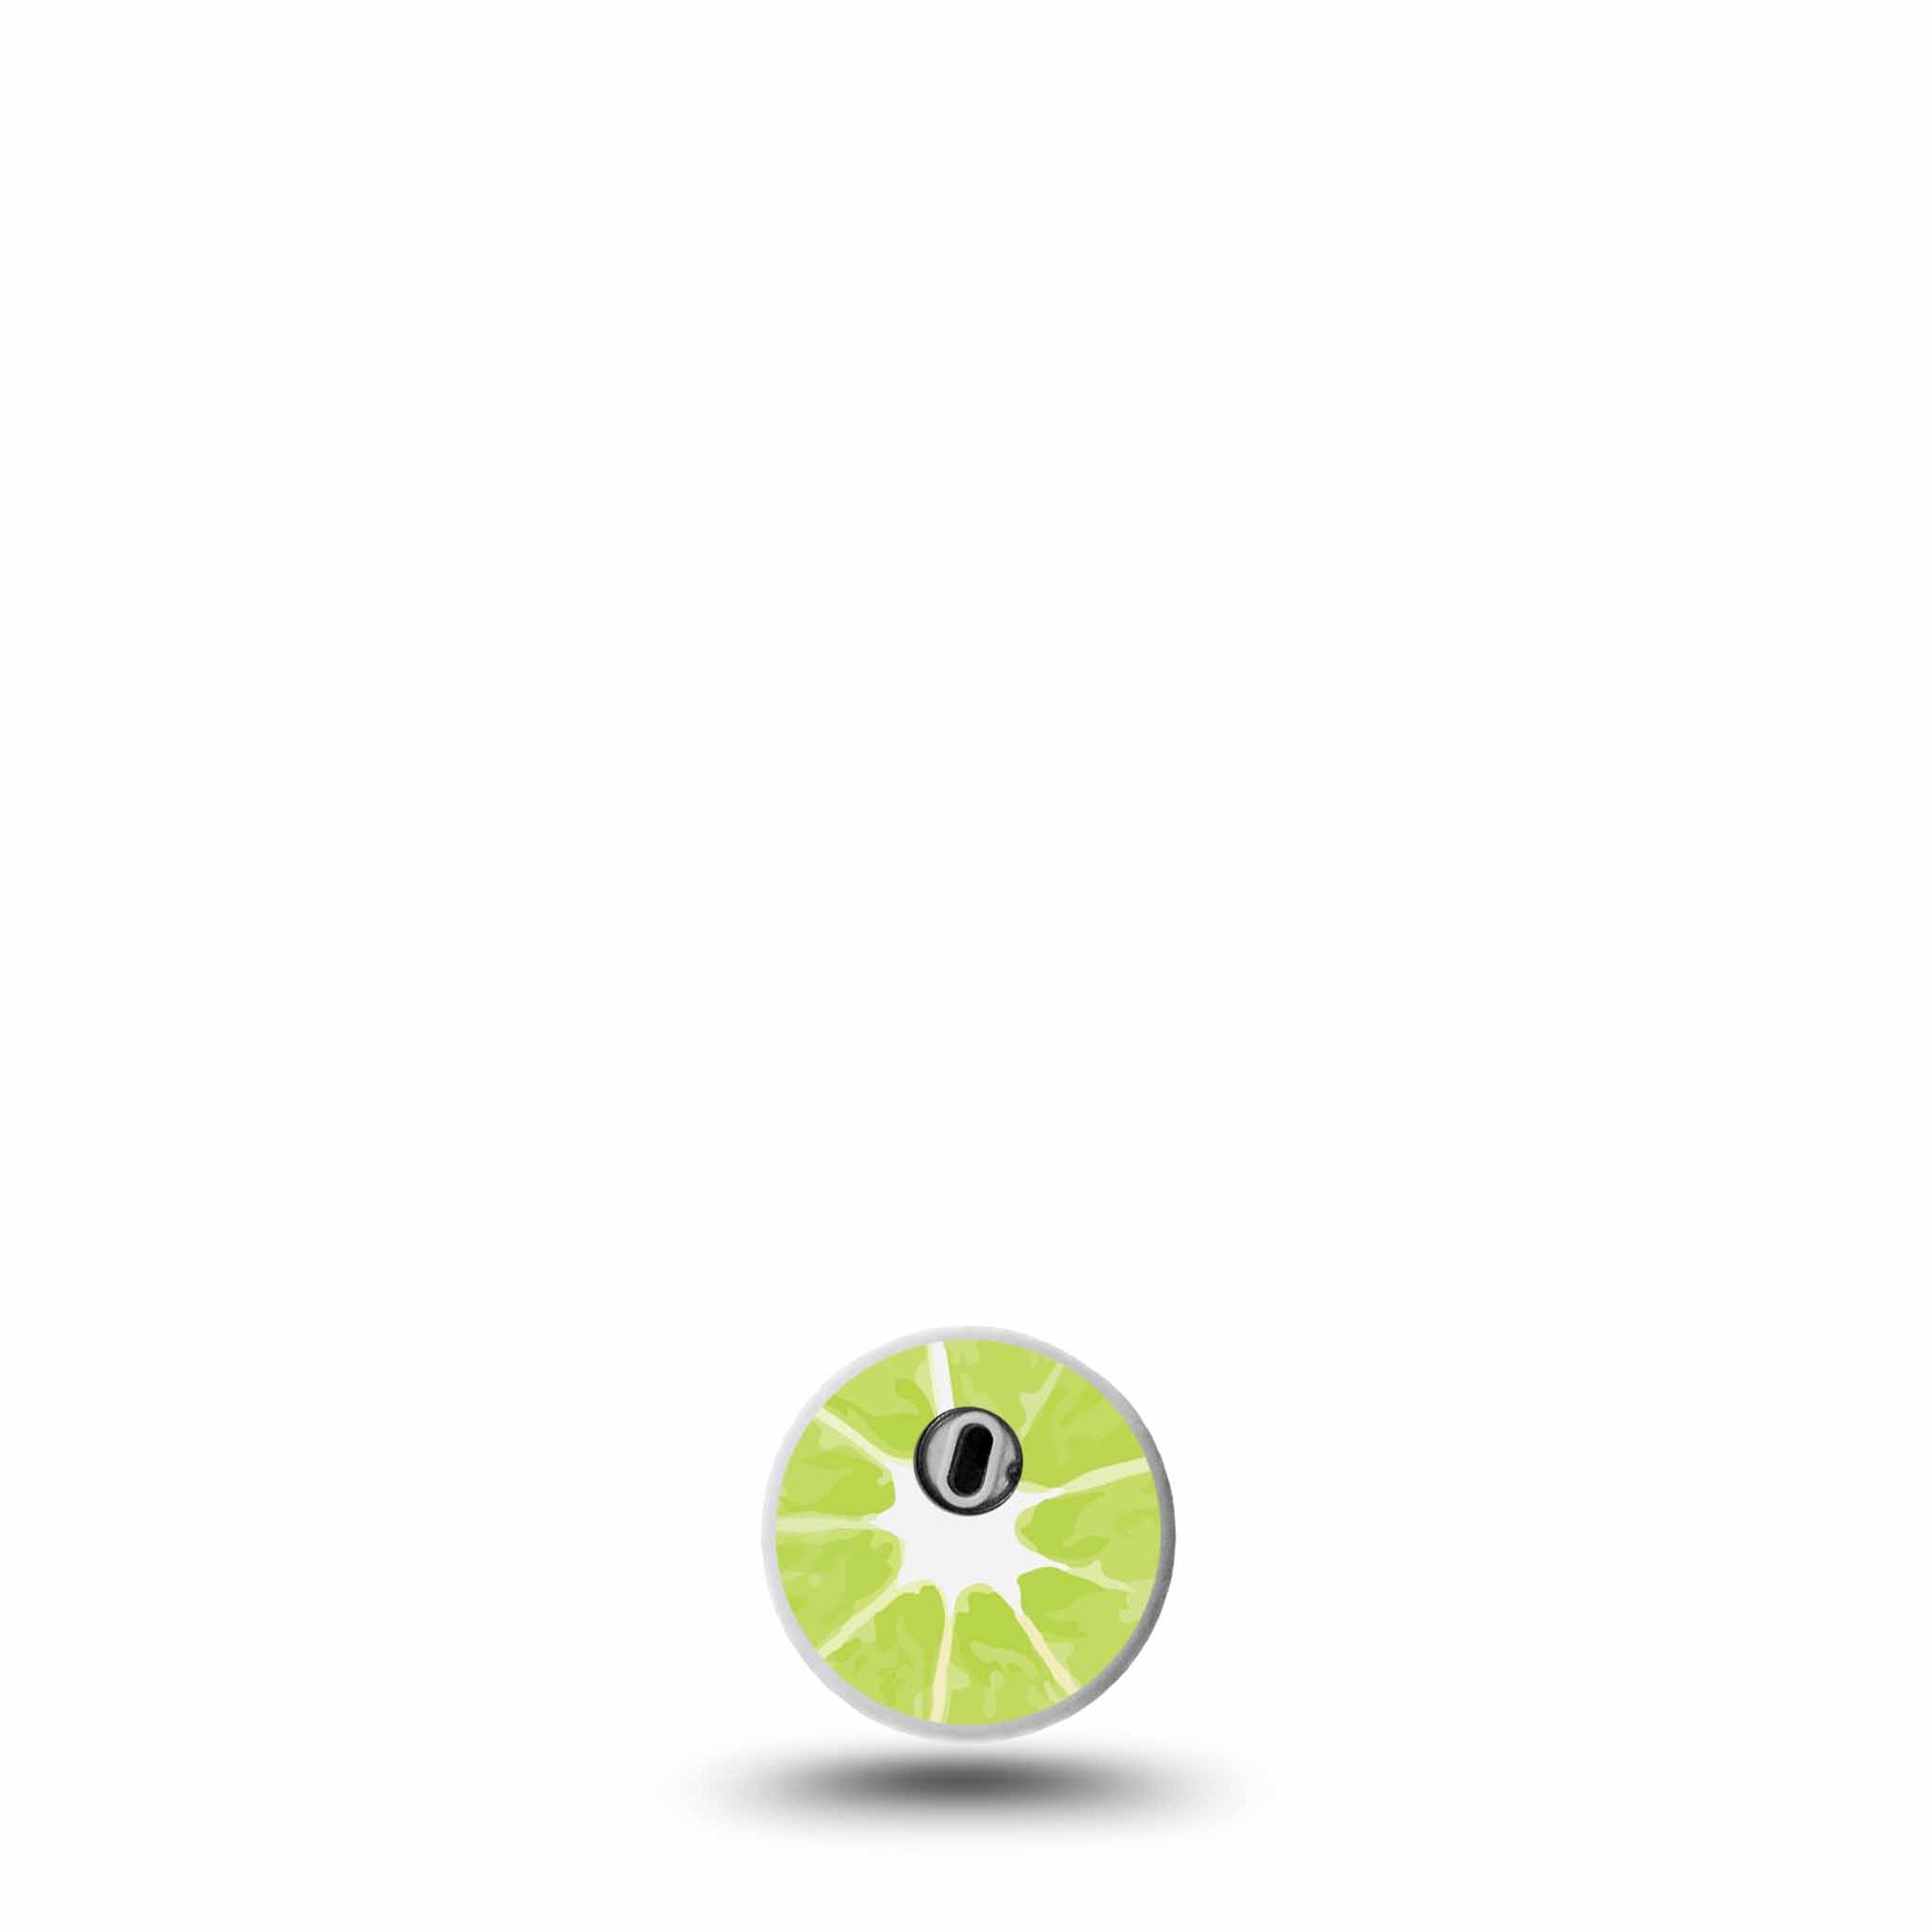 ExpressionMed Libre 3 Transmitter Sticker Citrus and Fruity Themed Design - Center Sticker